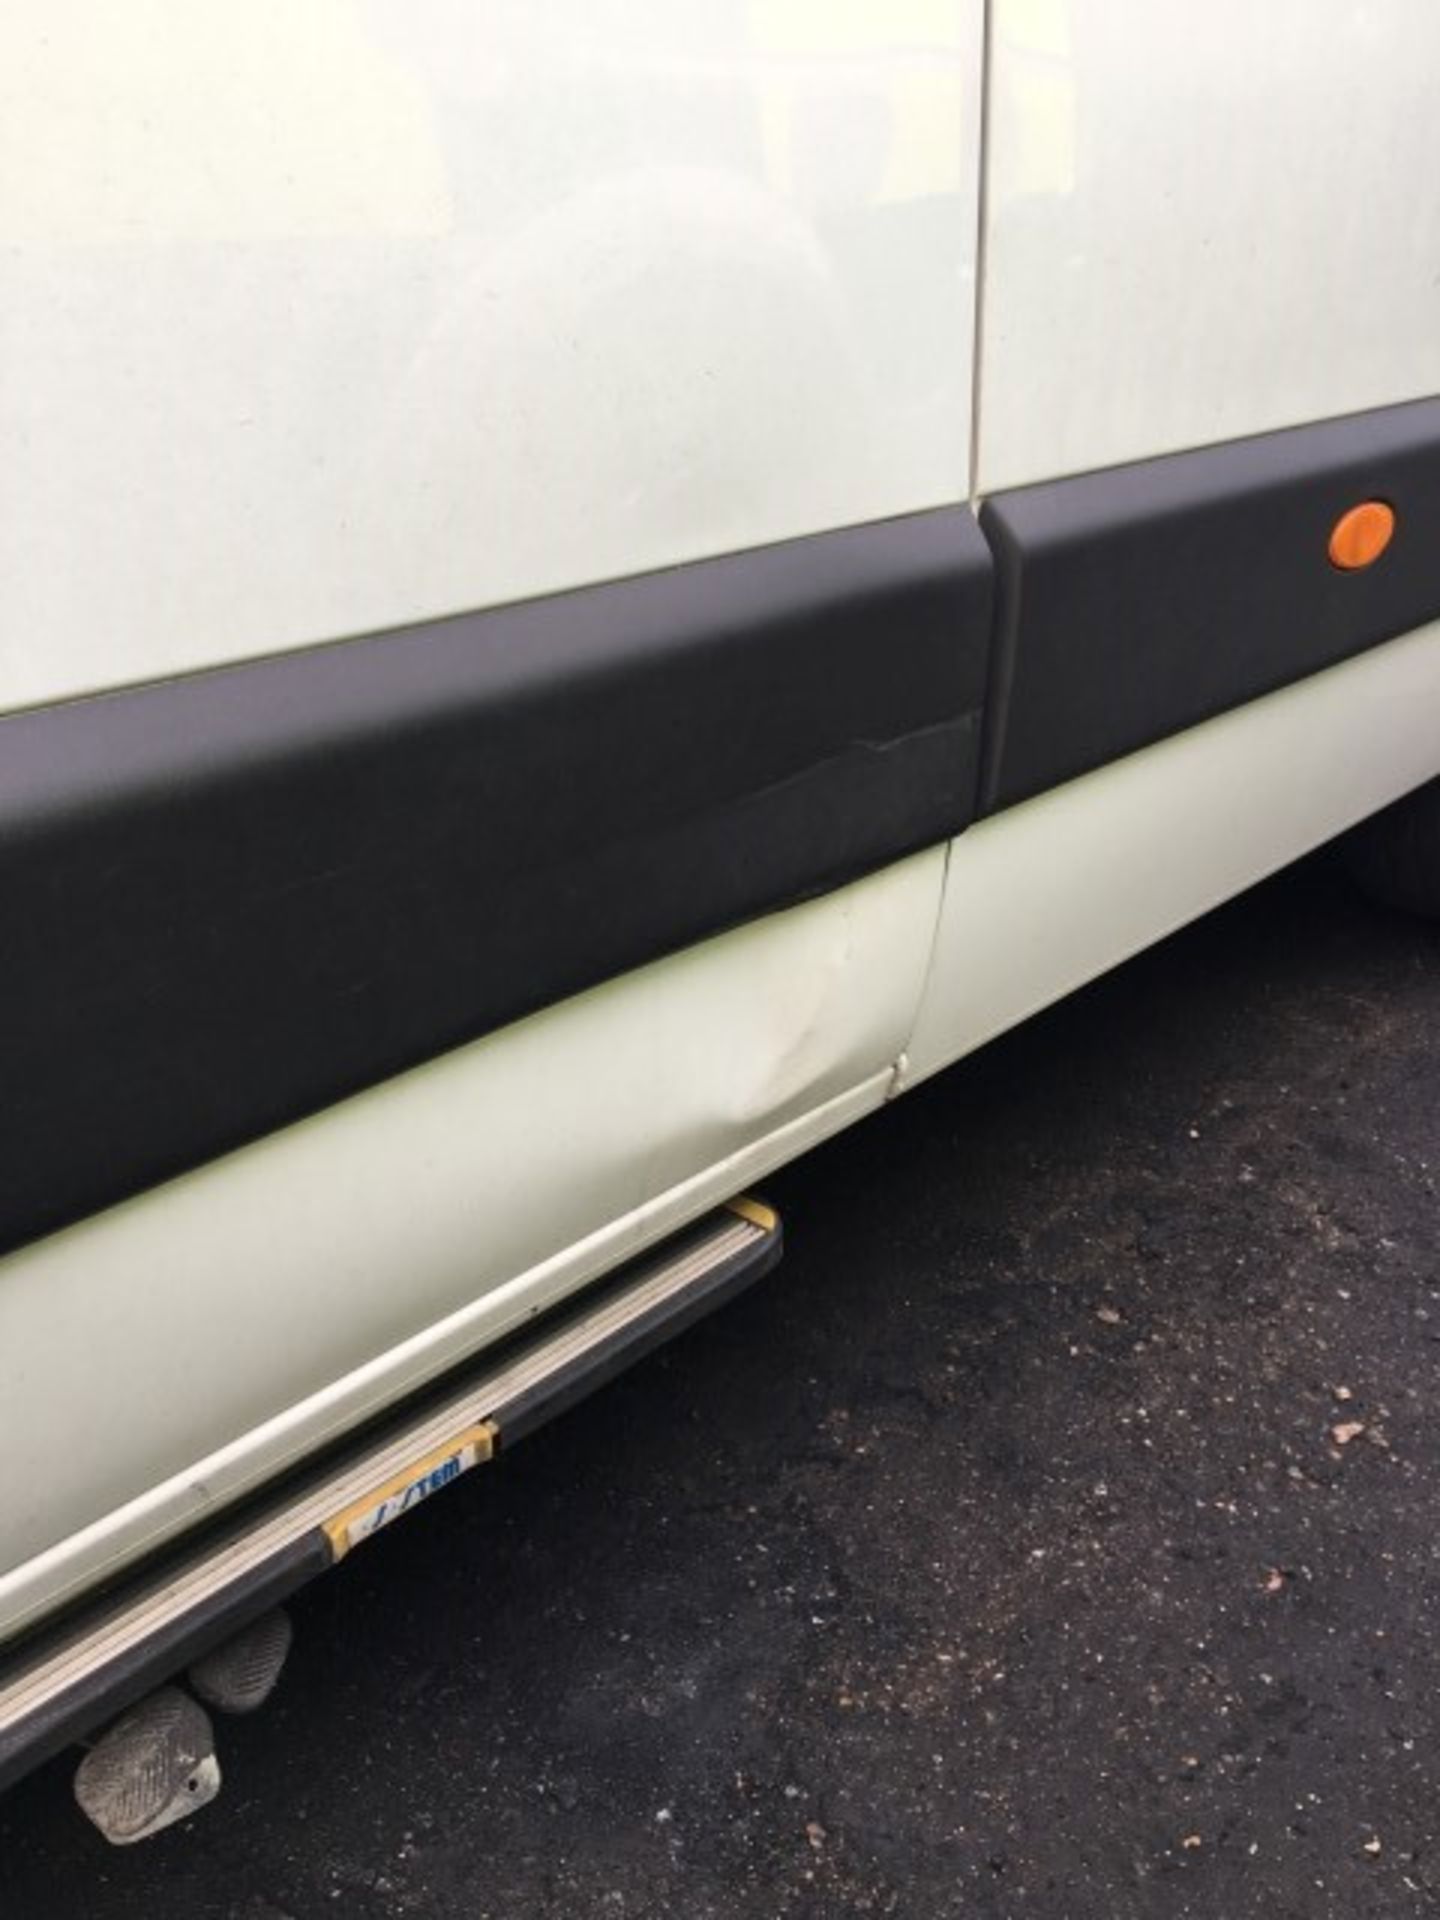 Renault Master LM35 130 dci with secure cell conversion (2017) - Image 8 of 8